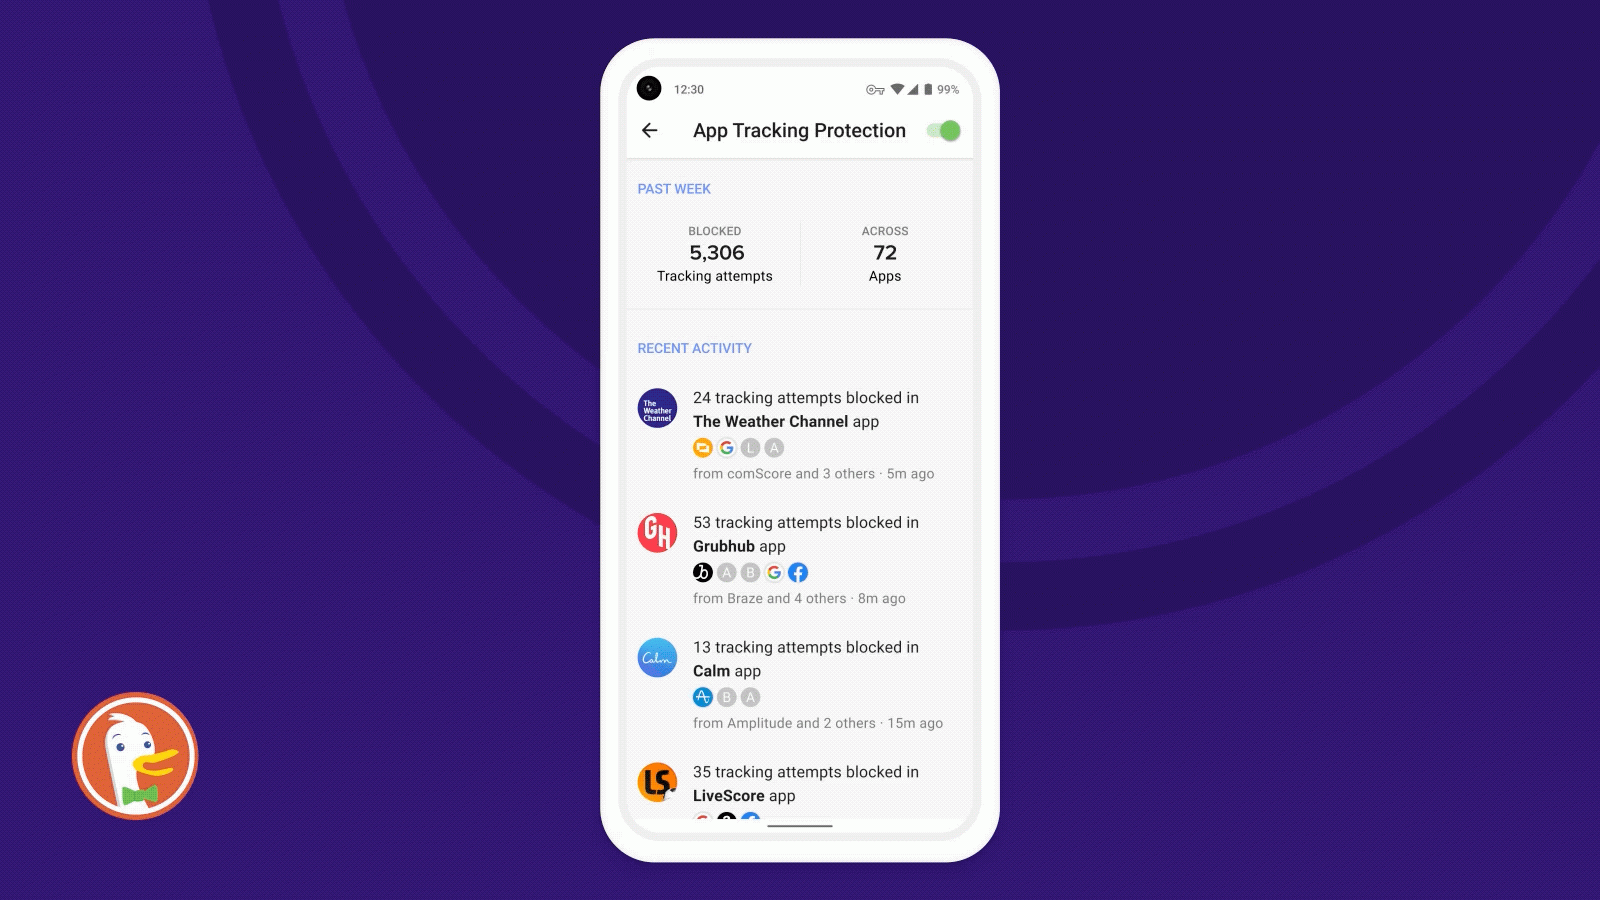 app tracking protection by DuckDuckGo